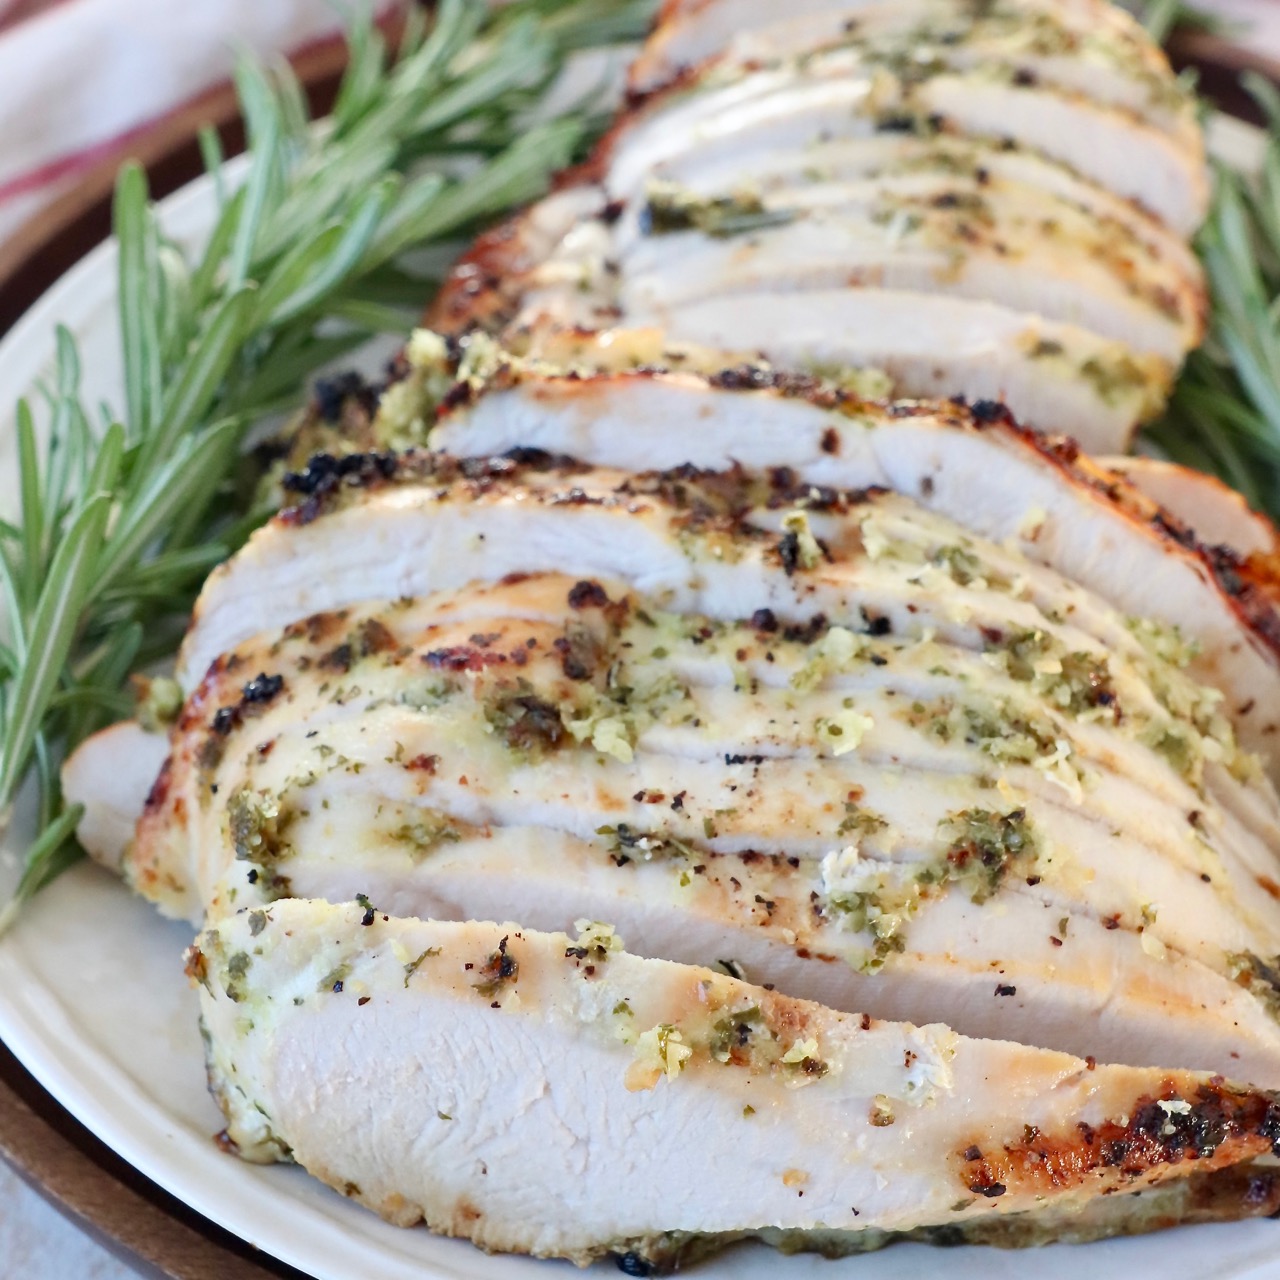 Simple Oven Roasted Turkey Breast - The Stay At Home Chef